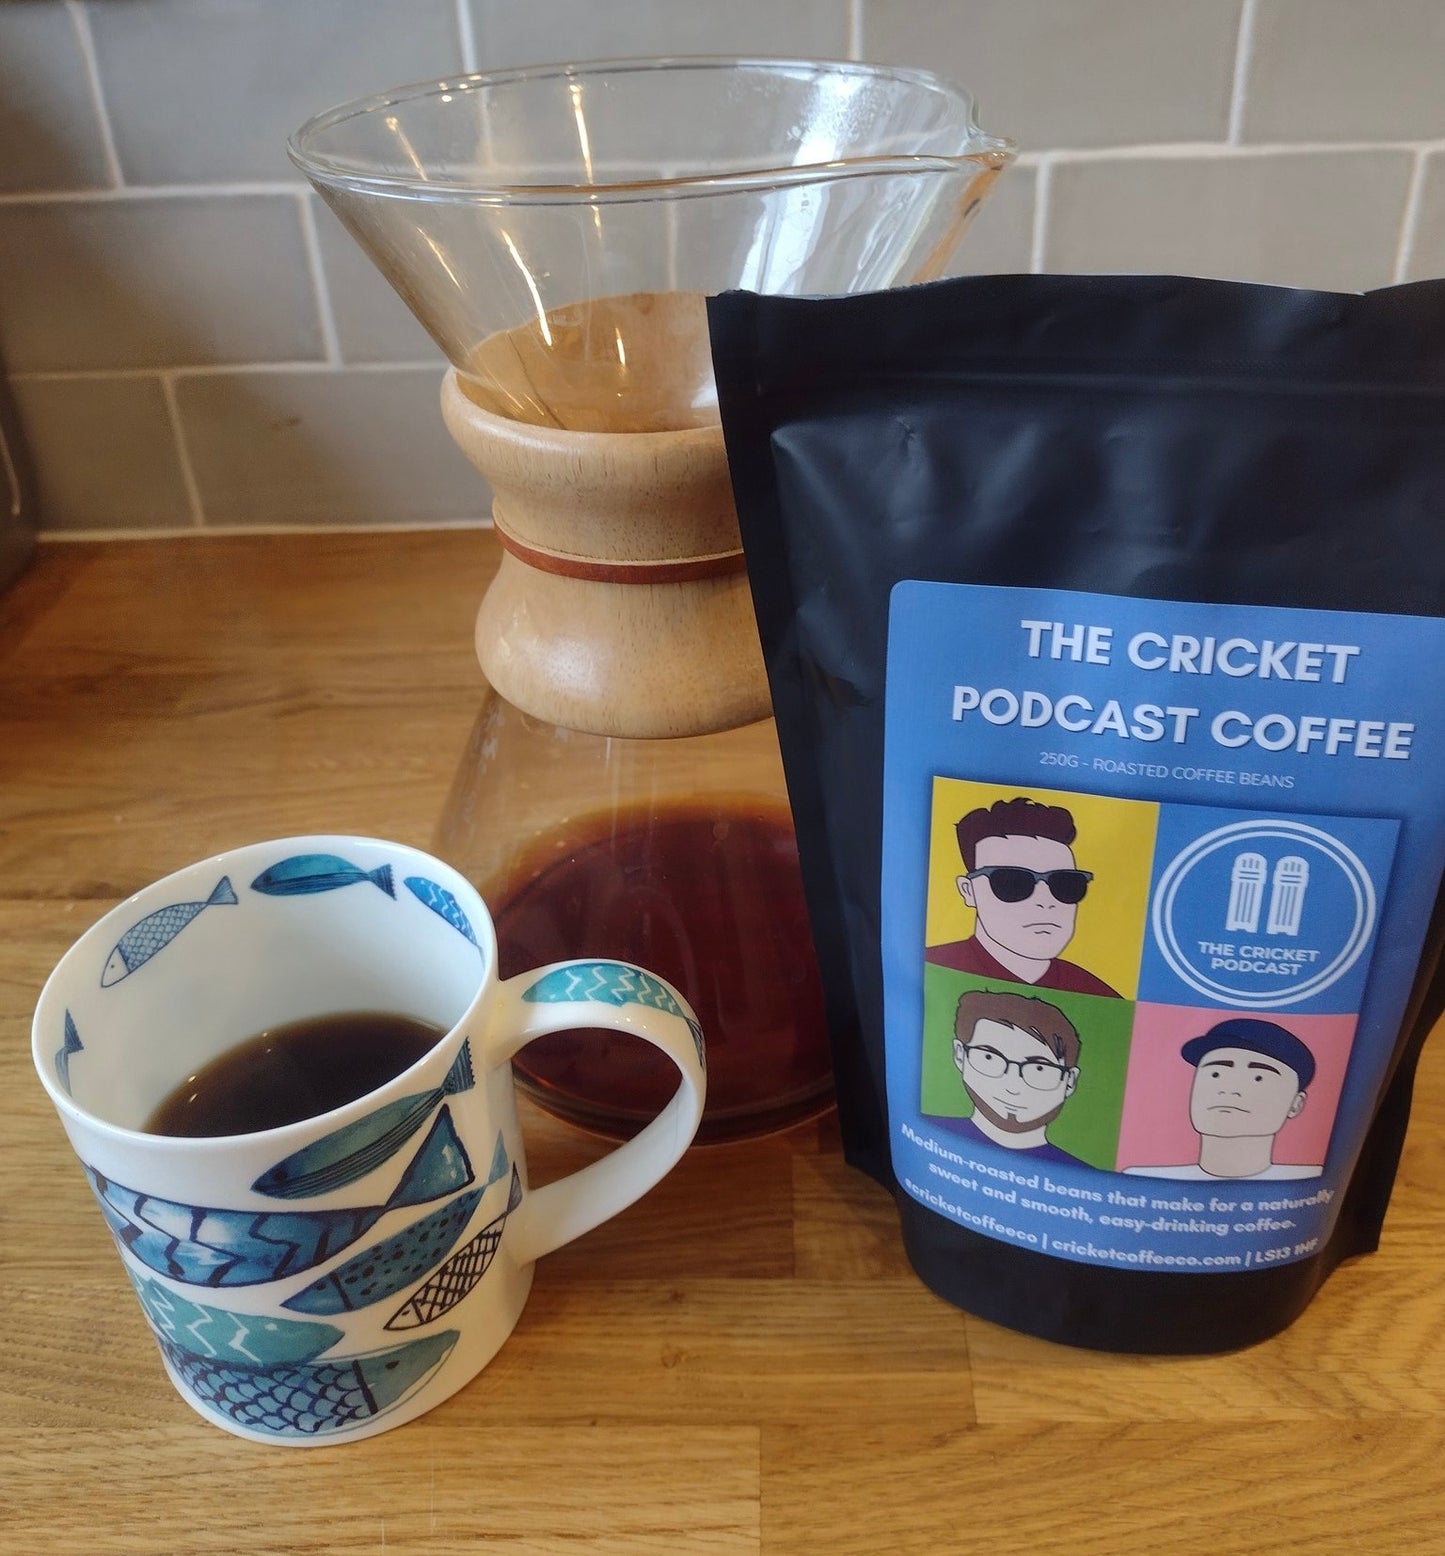 The Cricket Podcast Coffee